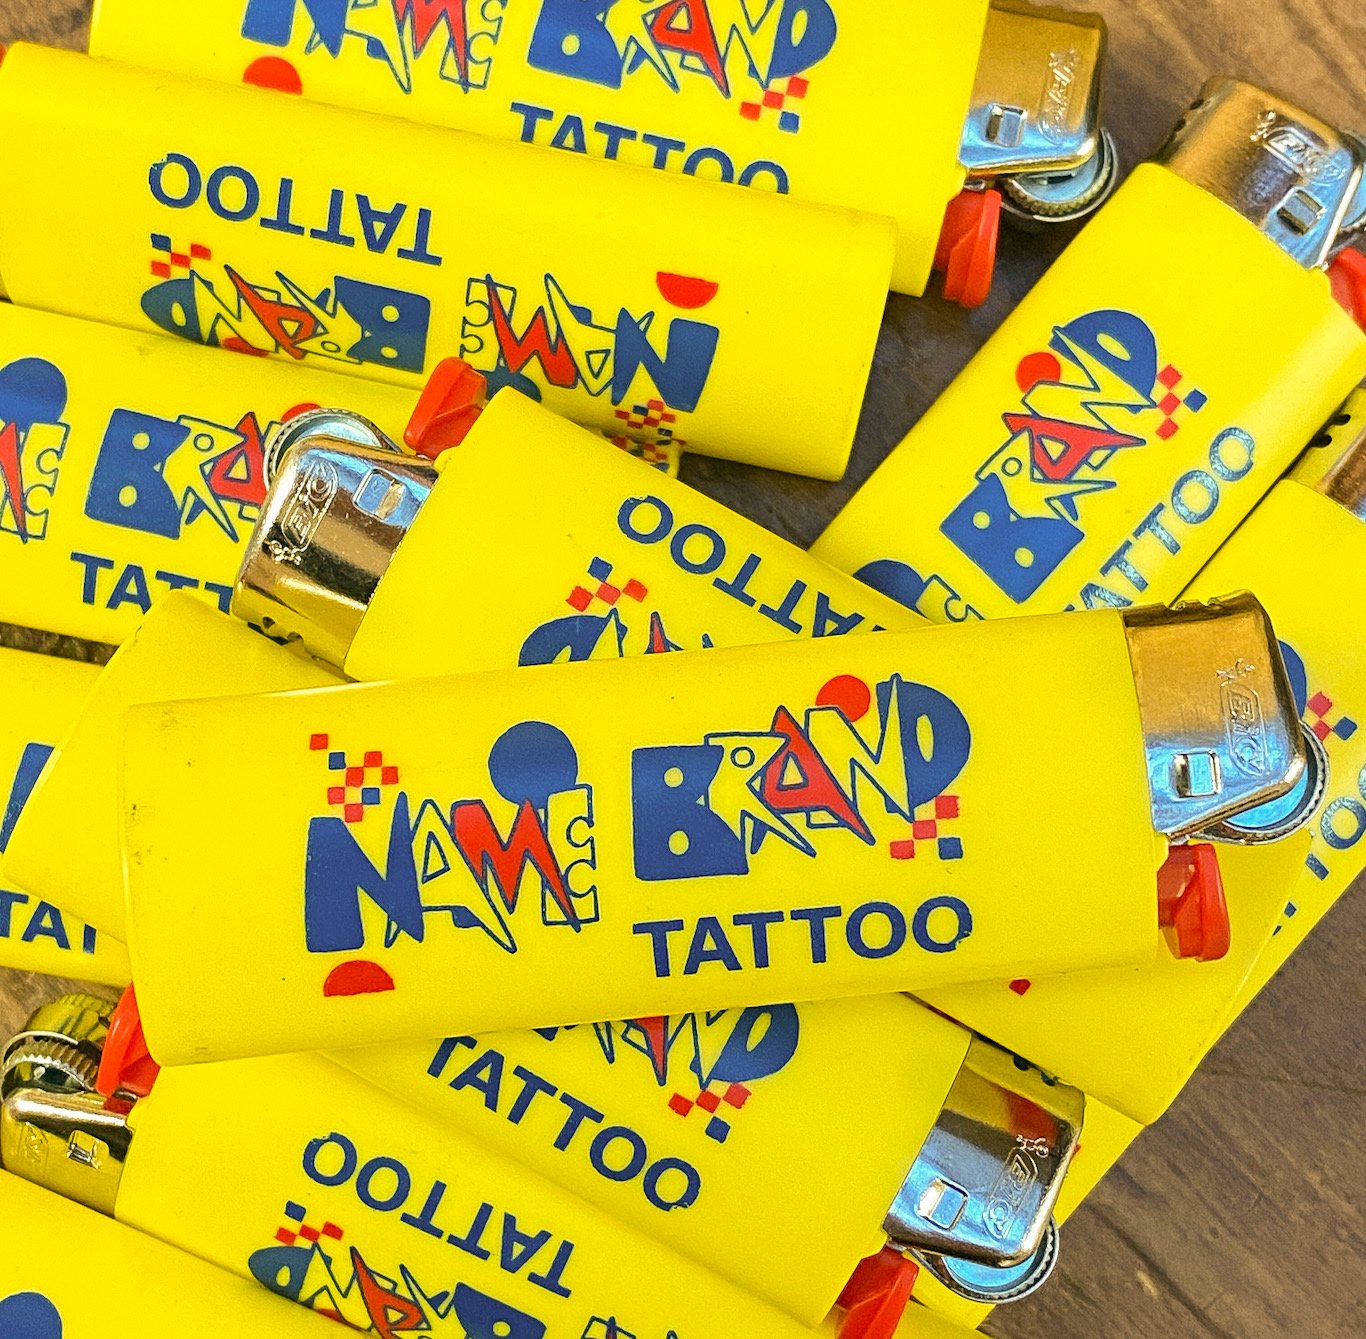 Tattoos in Experiential Marketing: Creating Memorable Brand Experiences